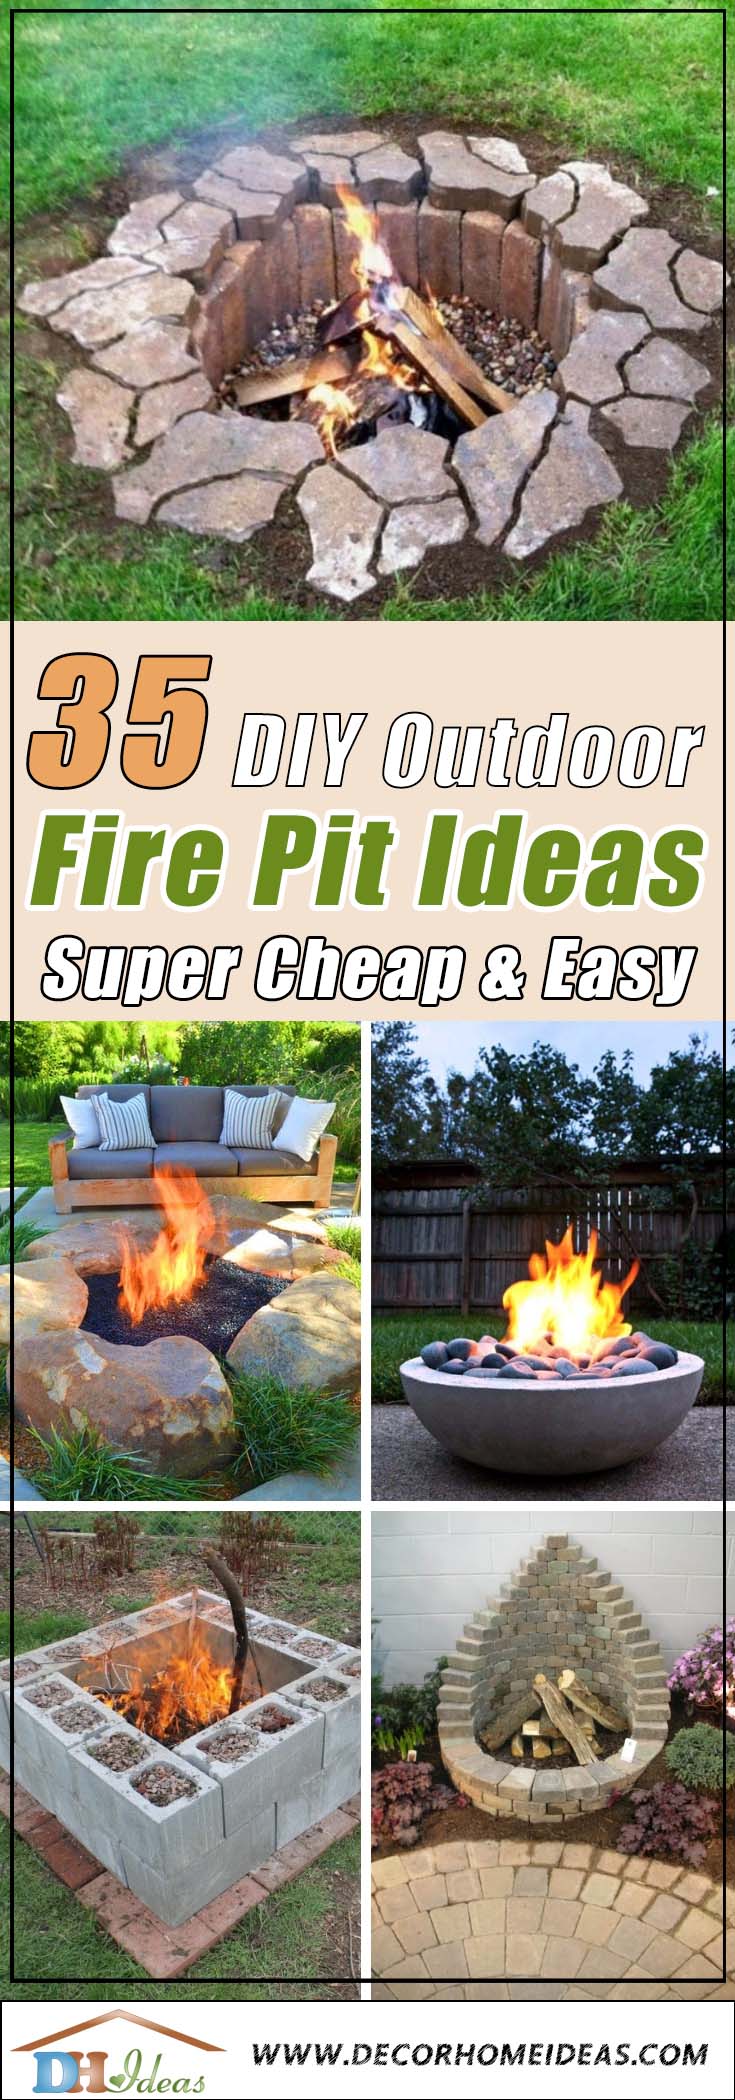 35 Easy To Do Fire Pit Ideas And, Easy To Build Outdoor Fire Pits